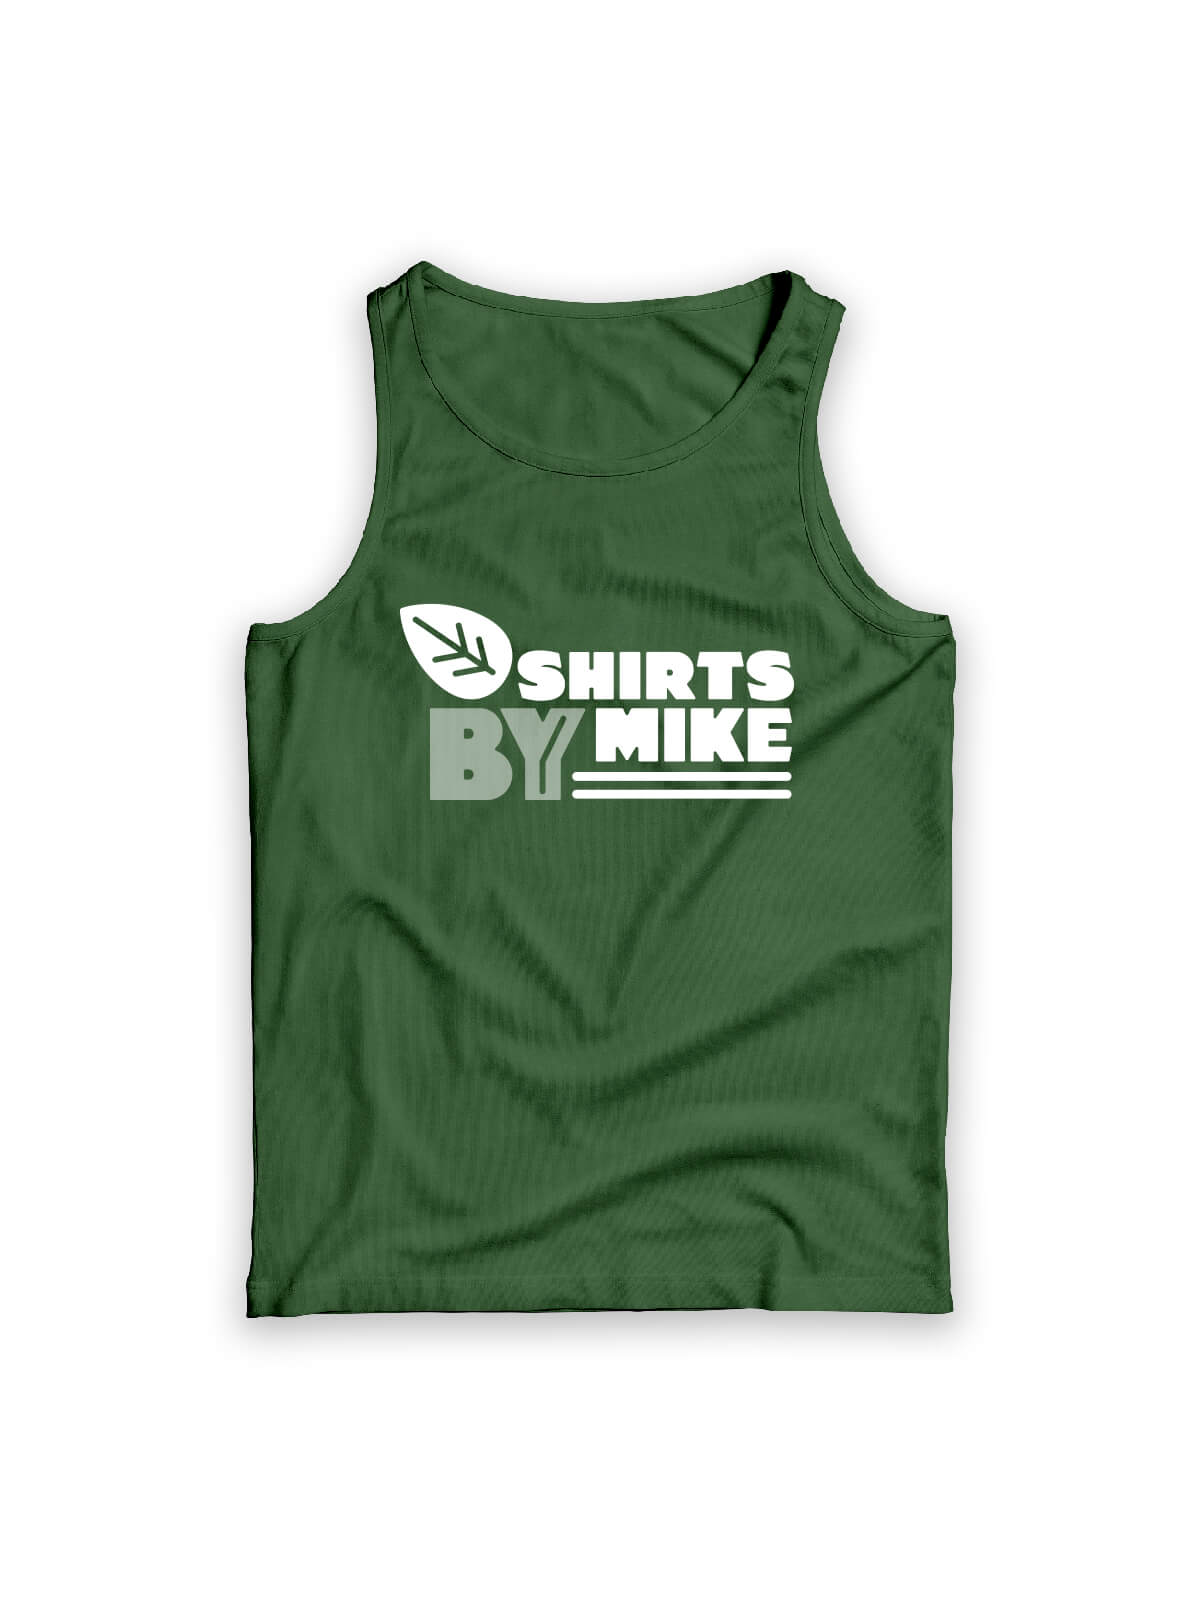 green t-shirt with Shirts By Mike logo